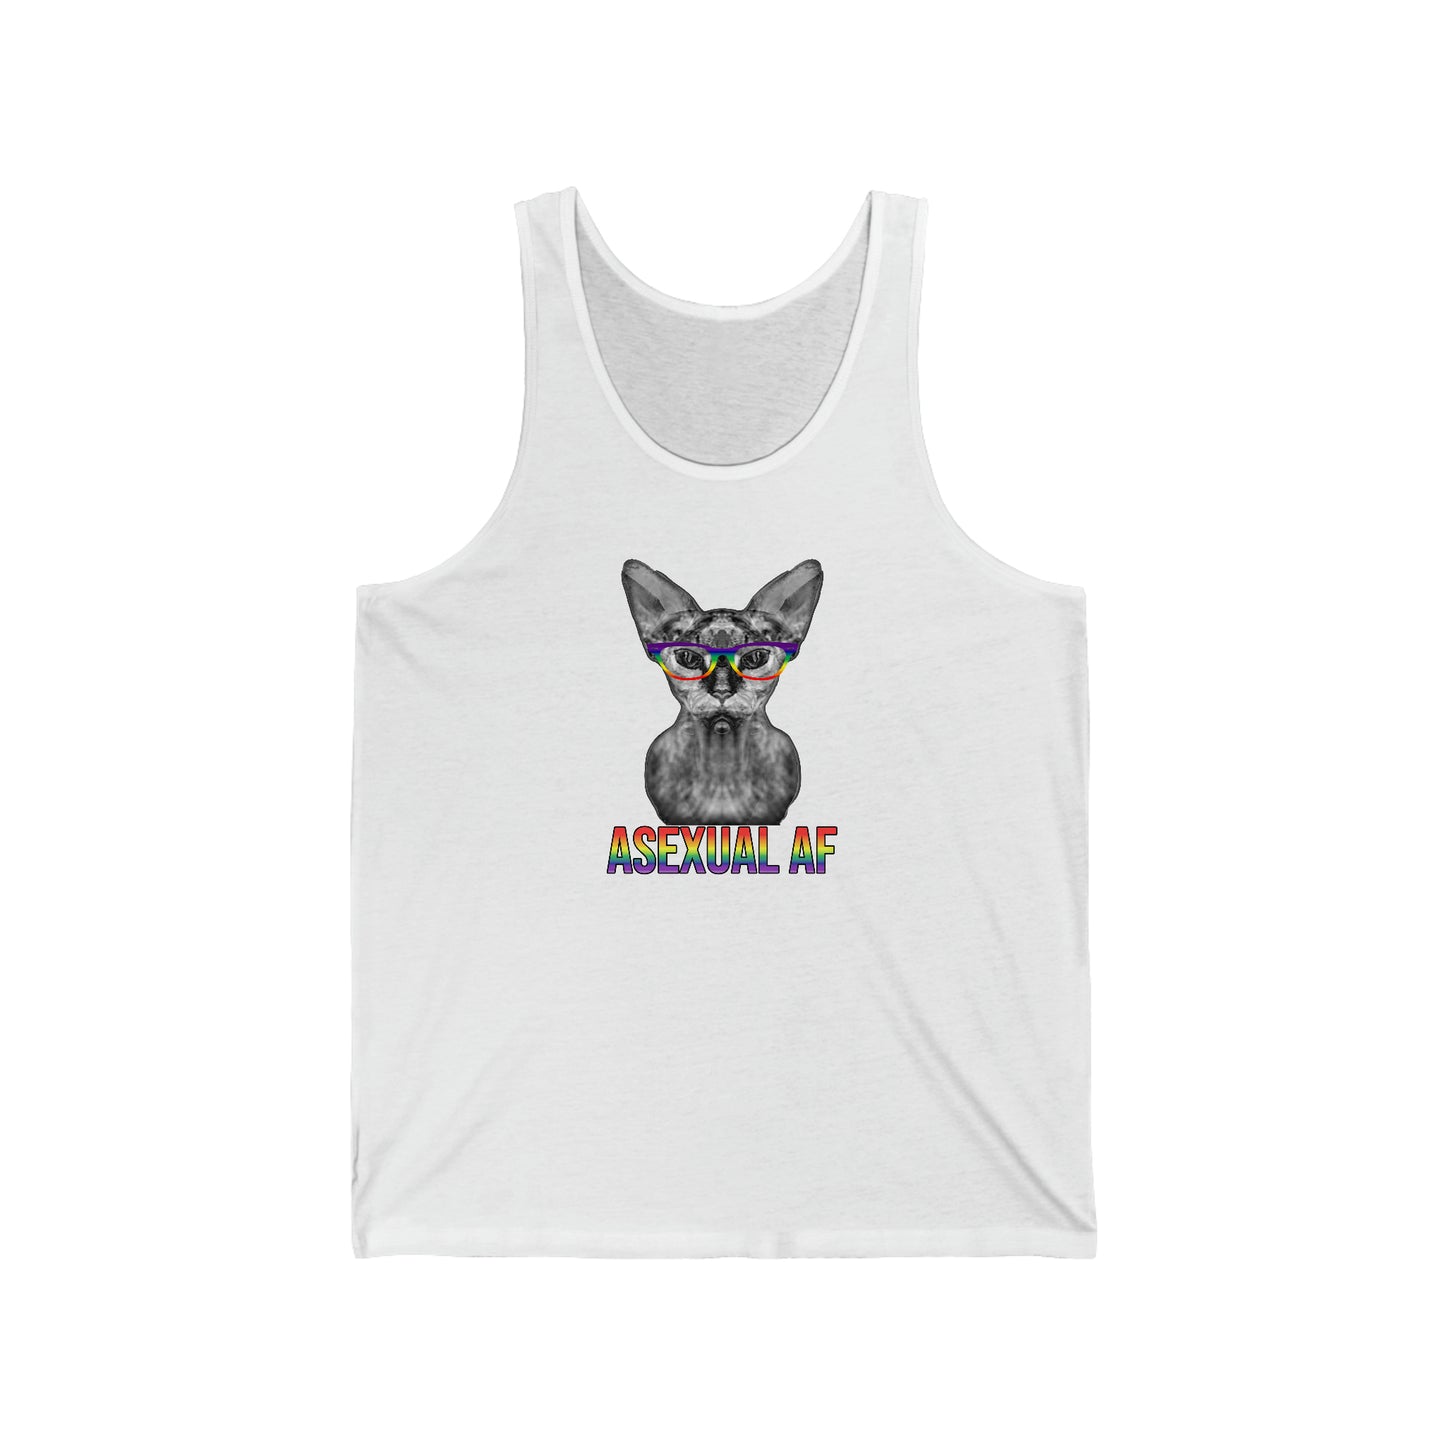 Asexual AF Sphynx Cat Unisex Simple Jersey Tank Top